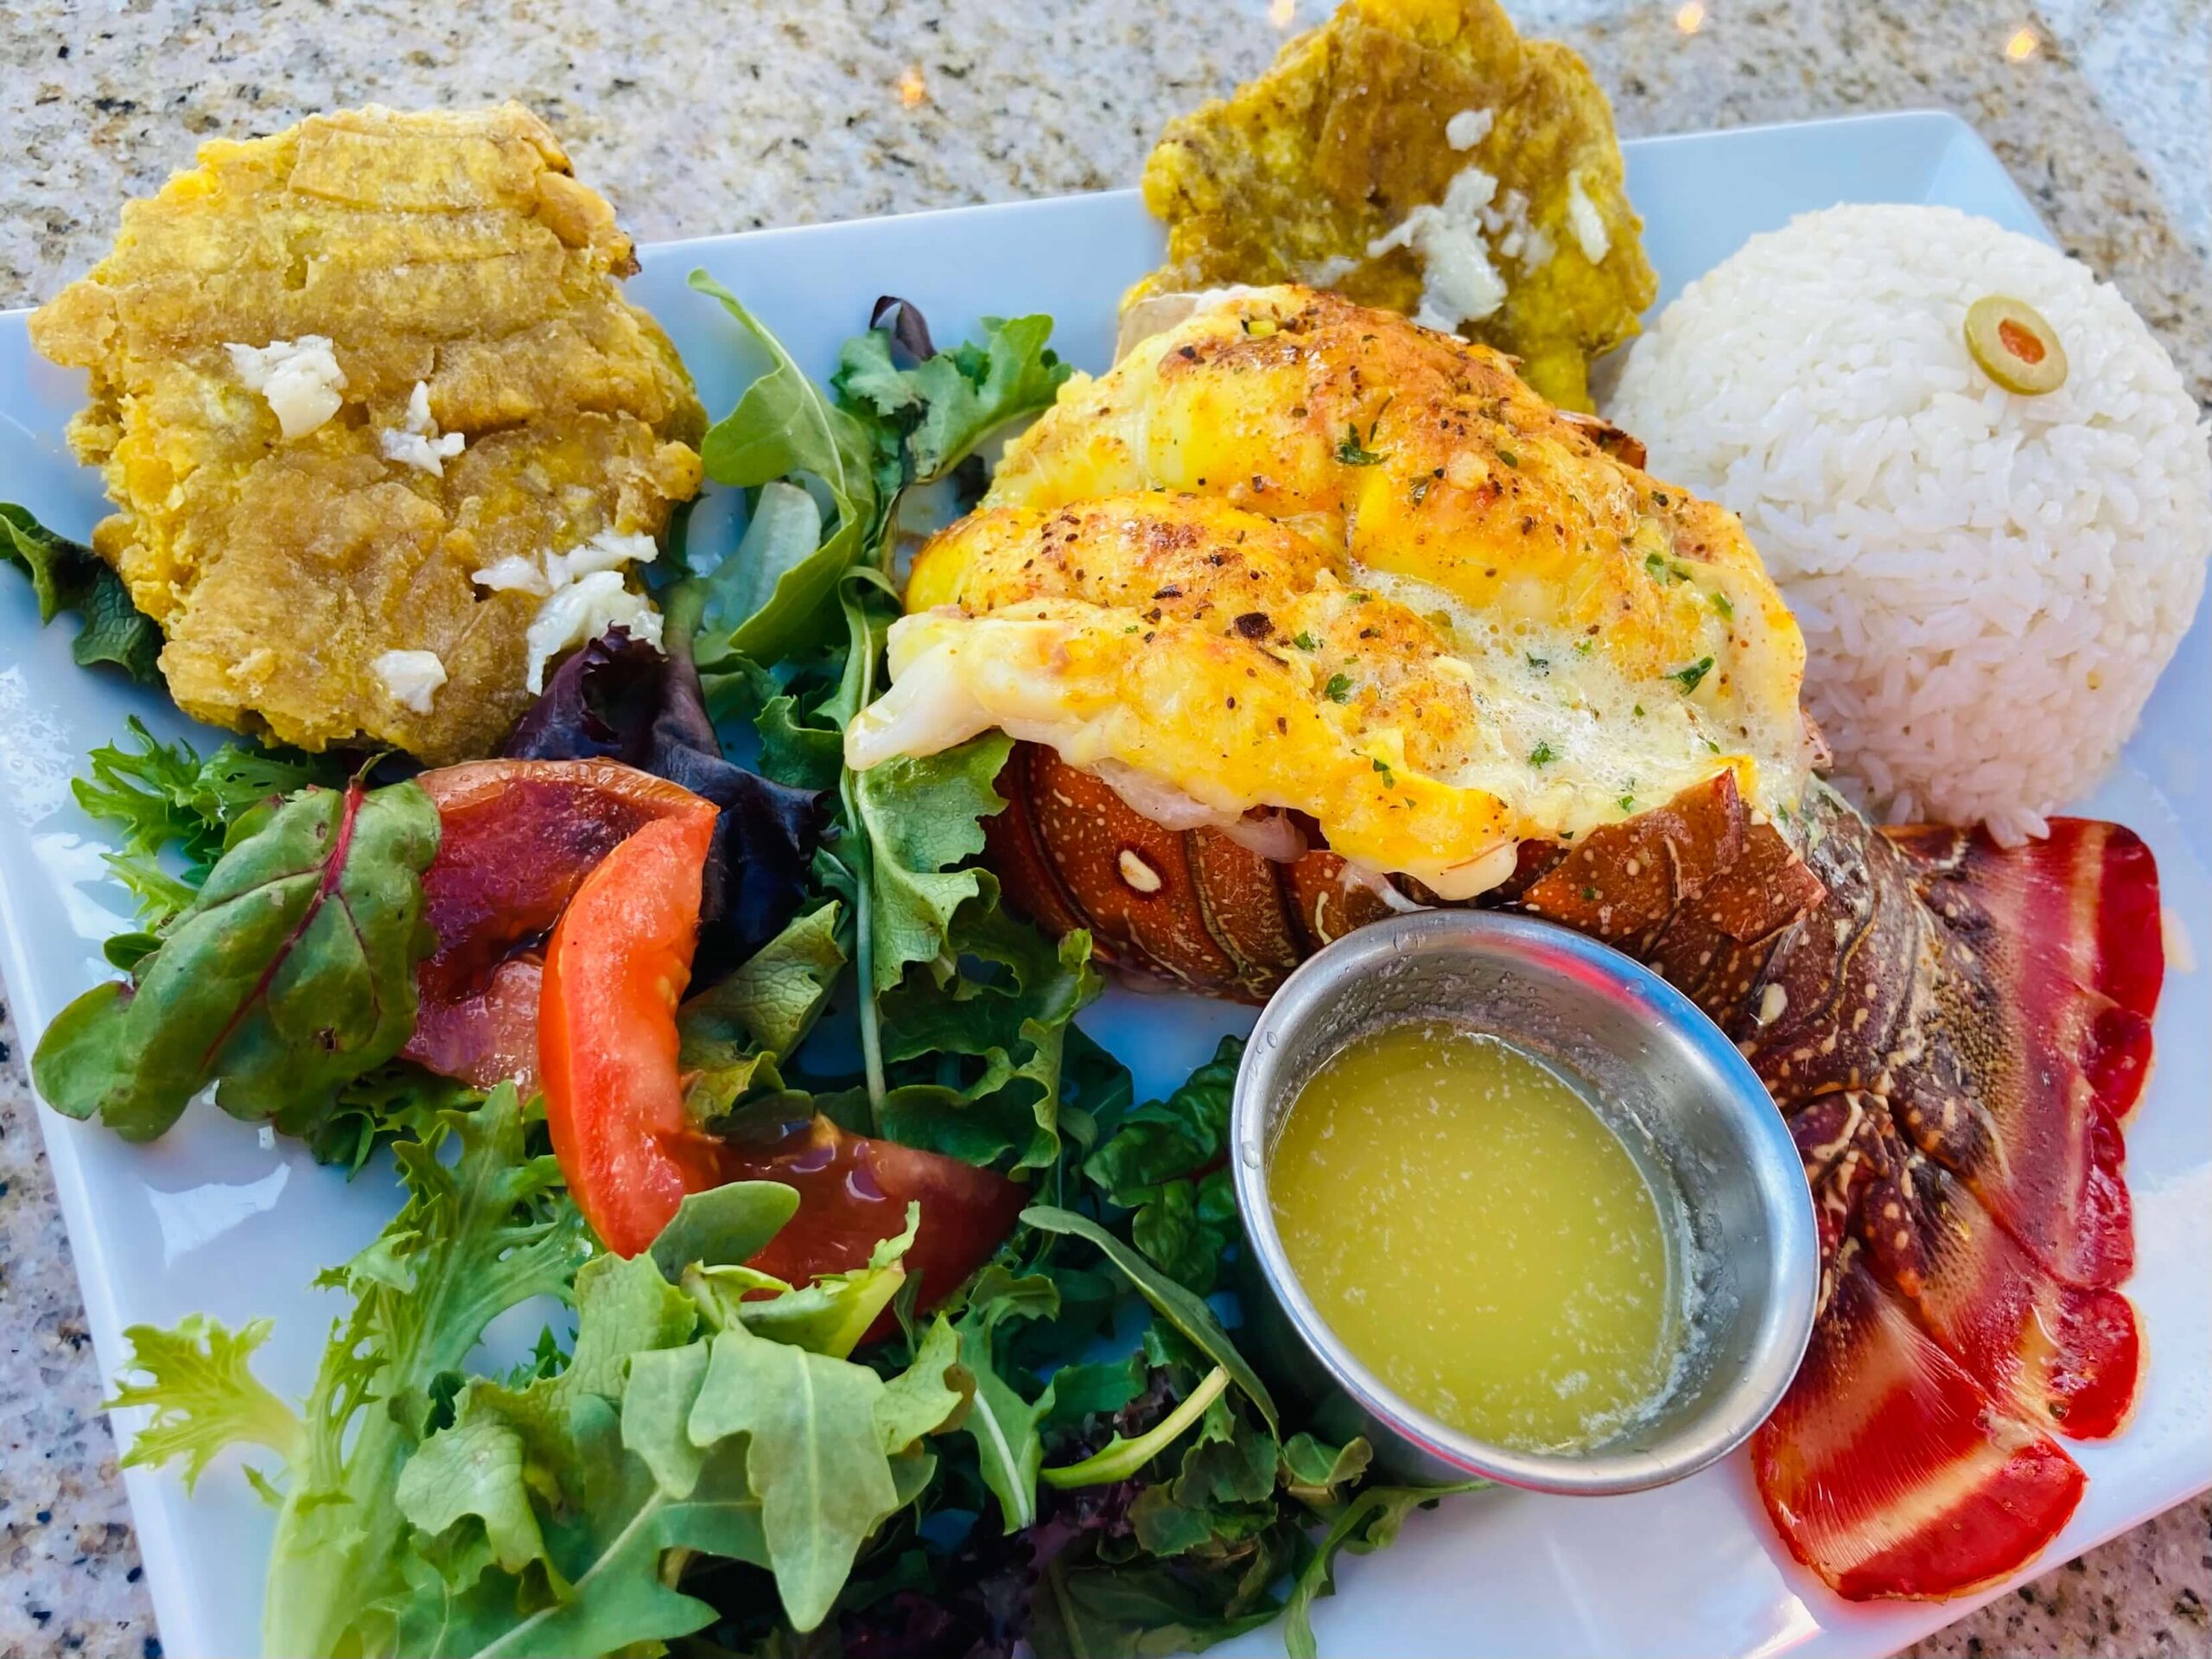 Lobster Tail, Rice, Fried Plantains and Salad from Latin Flavor Restaurant